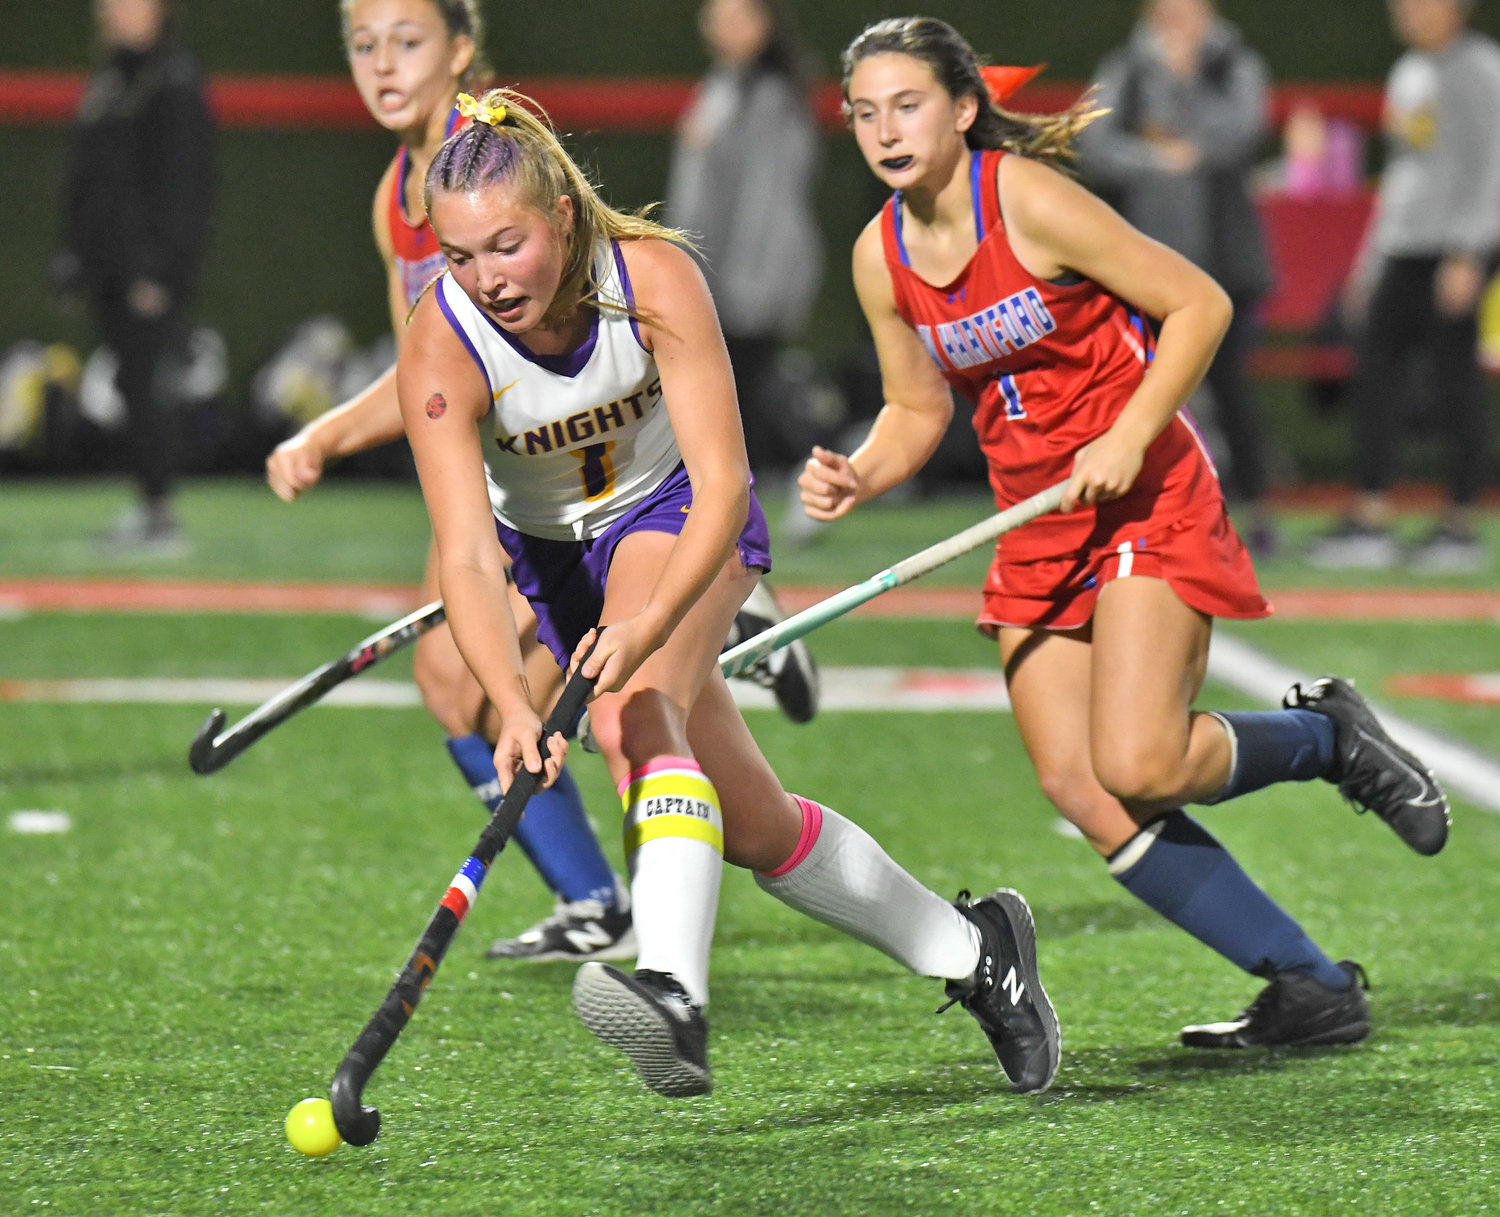 Holland Patent's Maggie Cummings controls the ball Sunday against New Hartford in the Section III Class B championship game at Vernon-Verona-Sherrill High School. Holland Patent coach Renee Morrison said Cummings was a key player for the Golden Knights in the win.